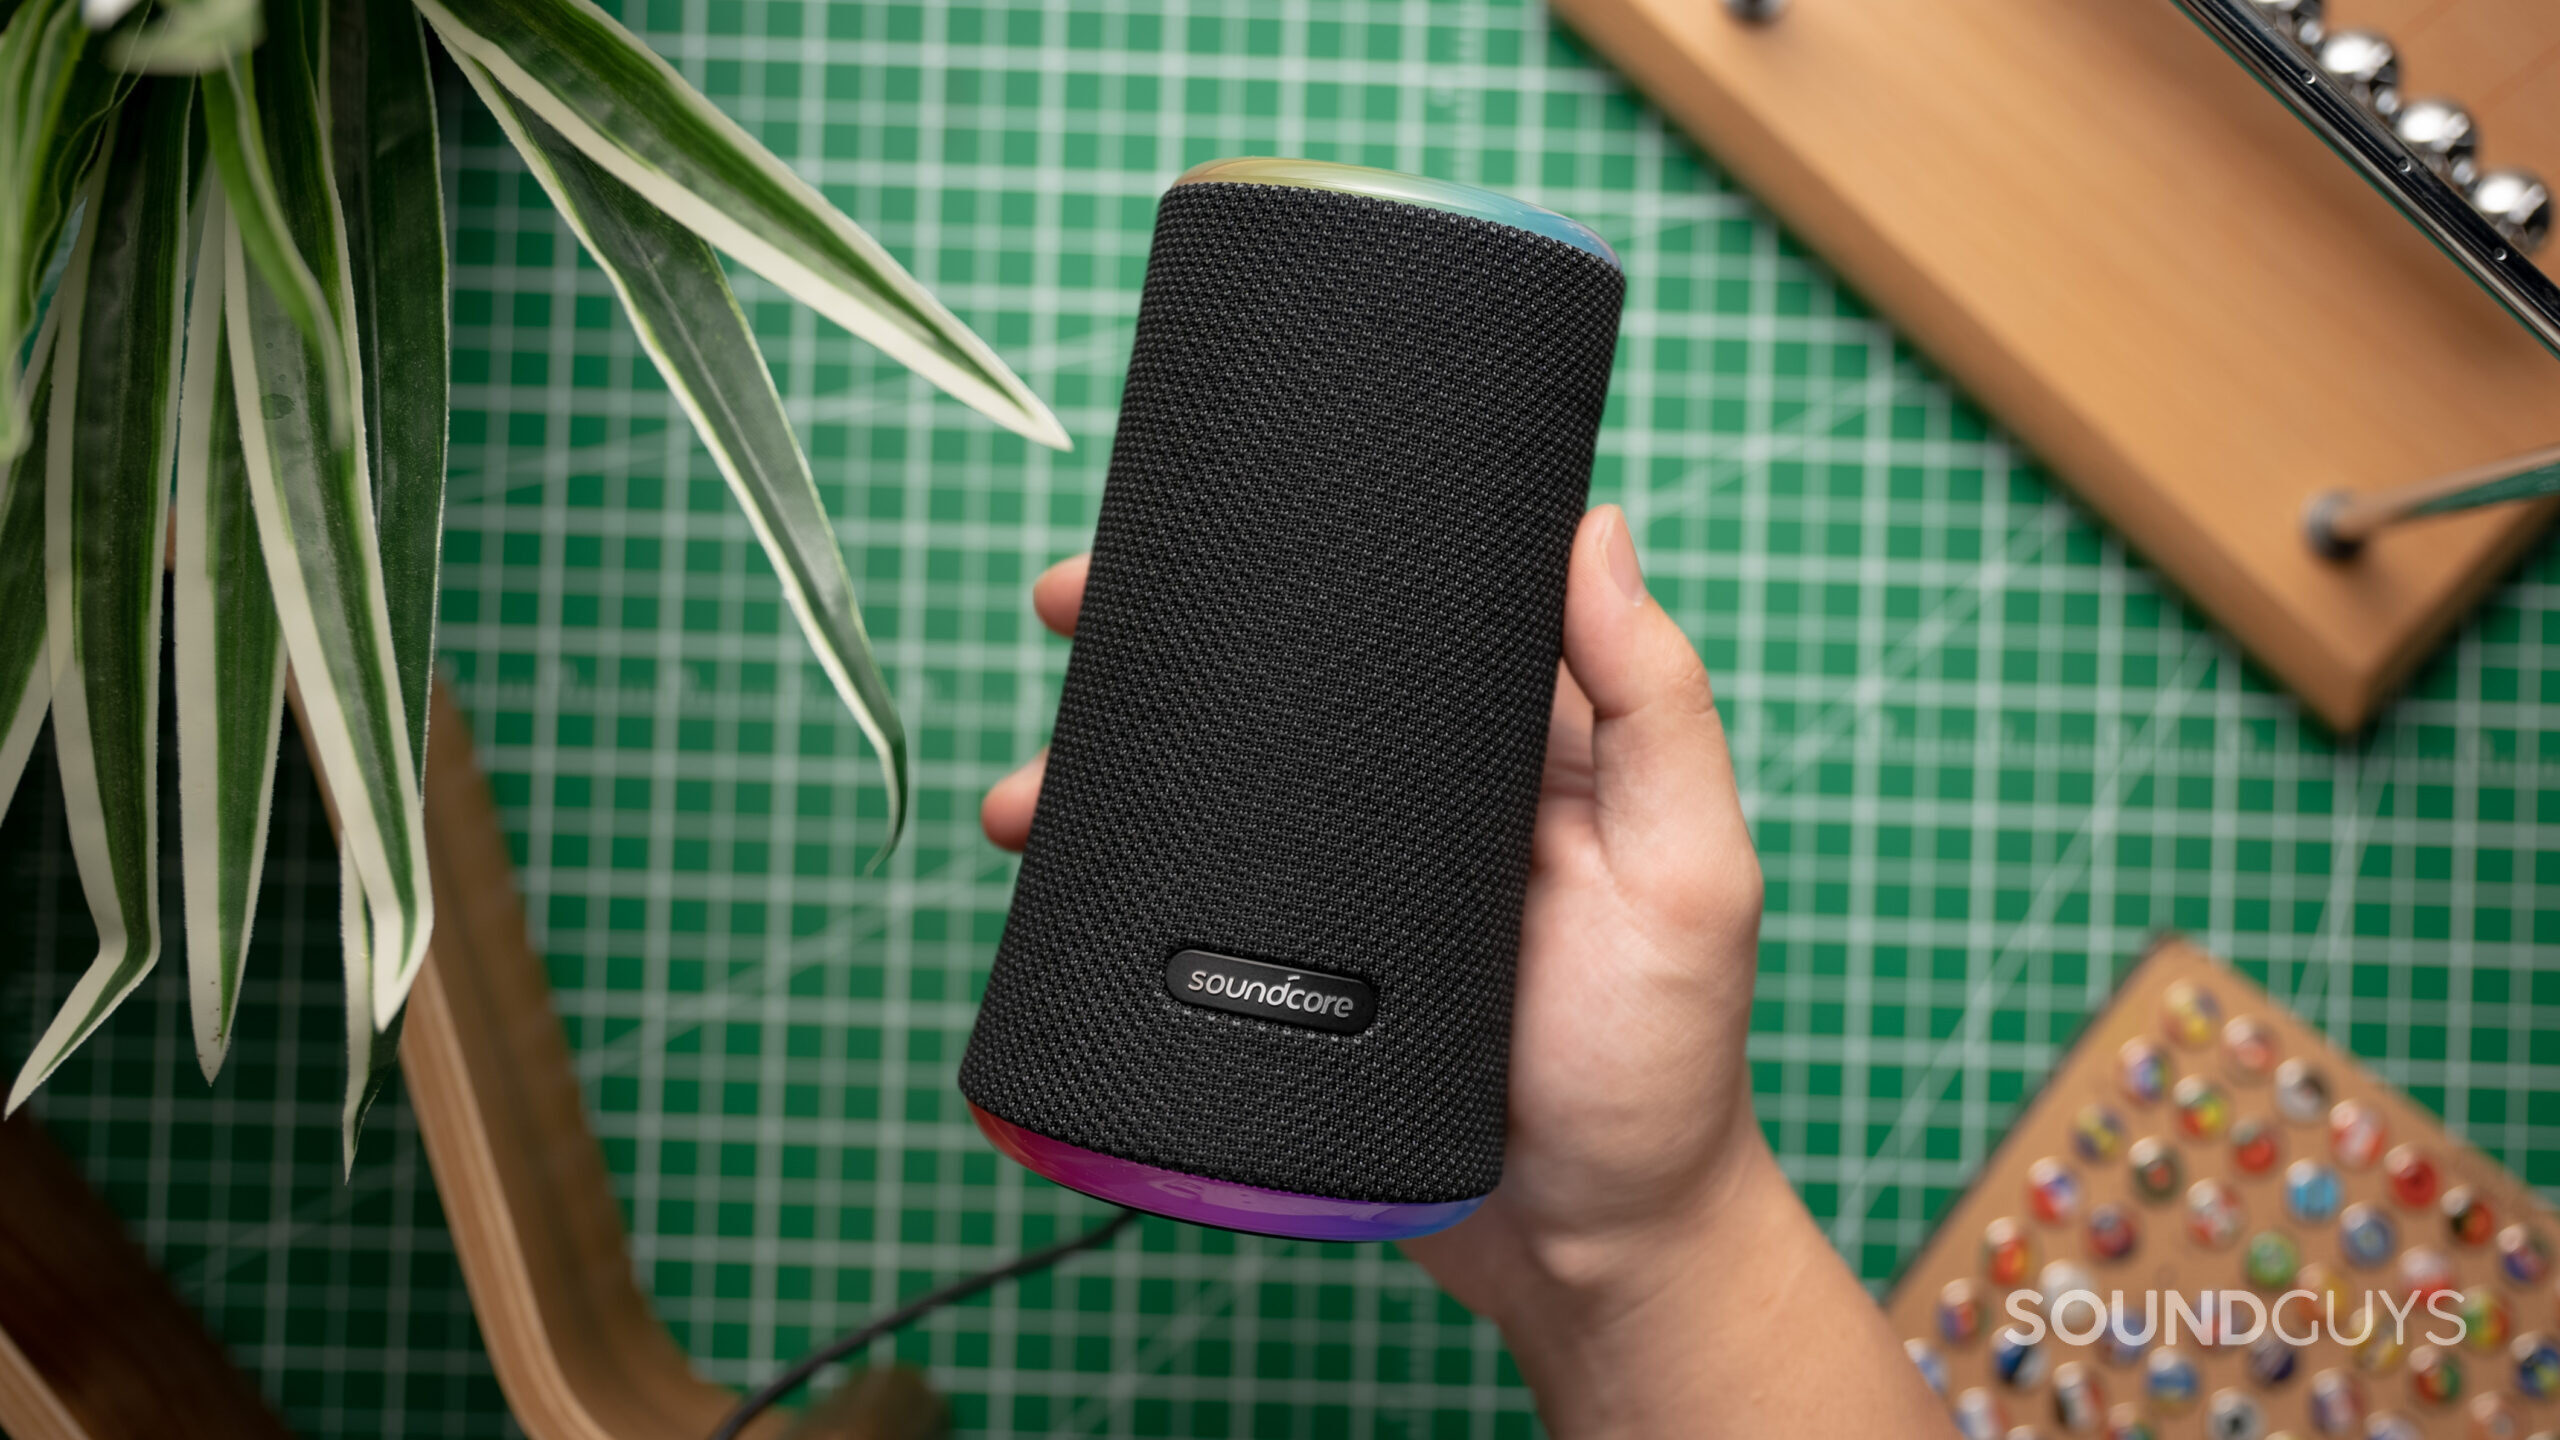 Anker Soundcore Flare 2 being held up by a hand against a flat surface with a plant and wooden objects in the background.